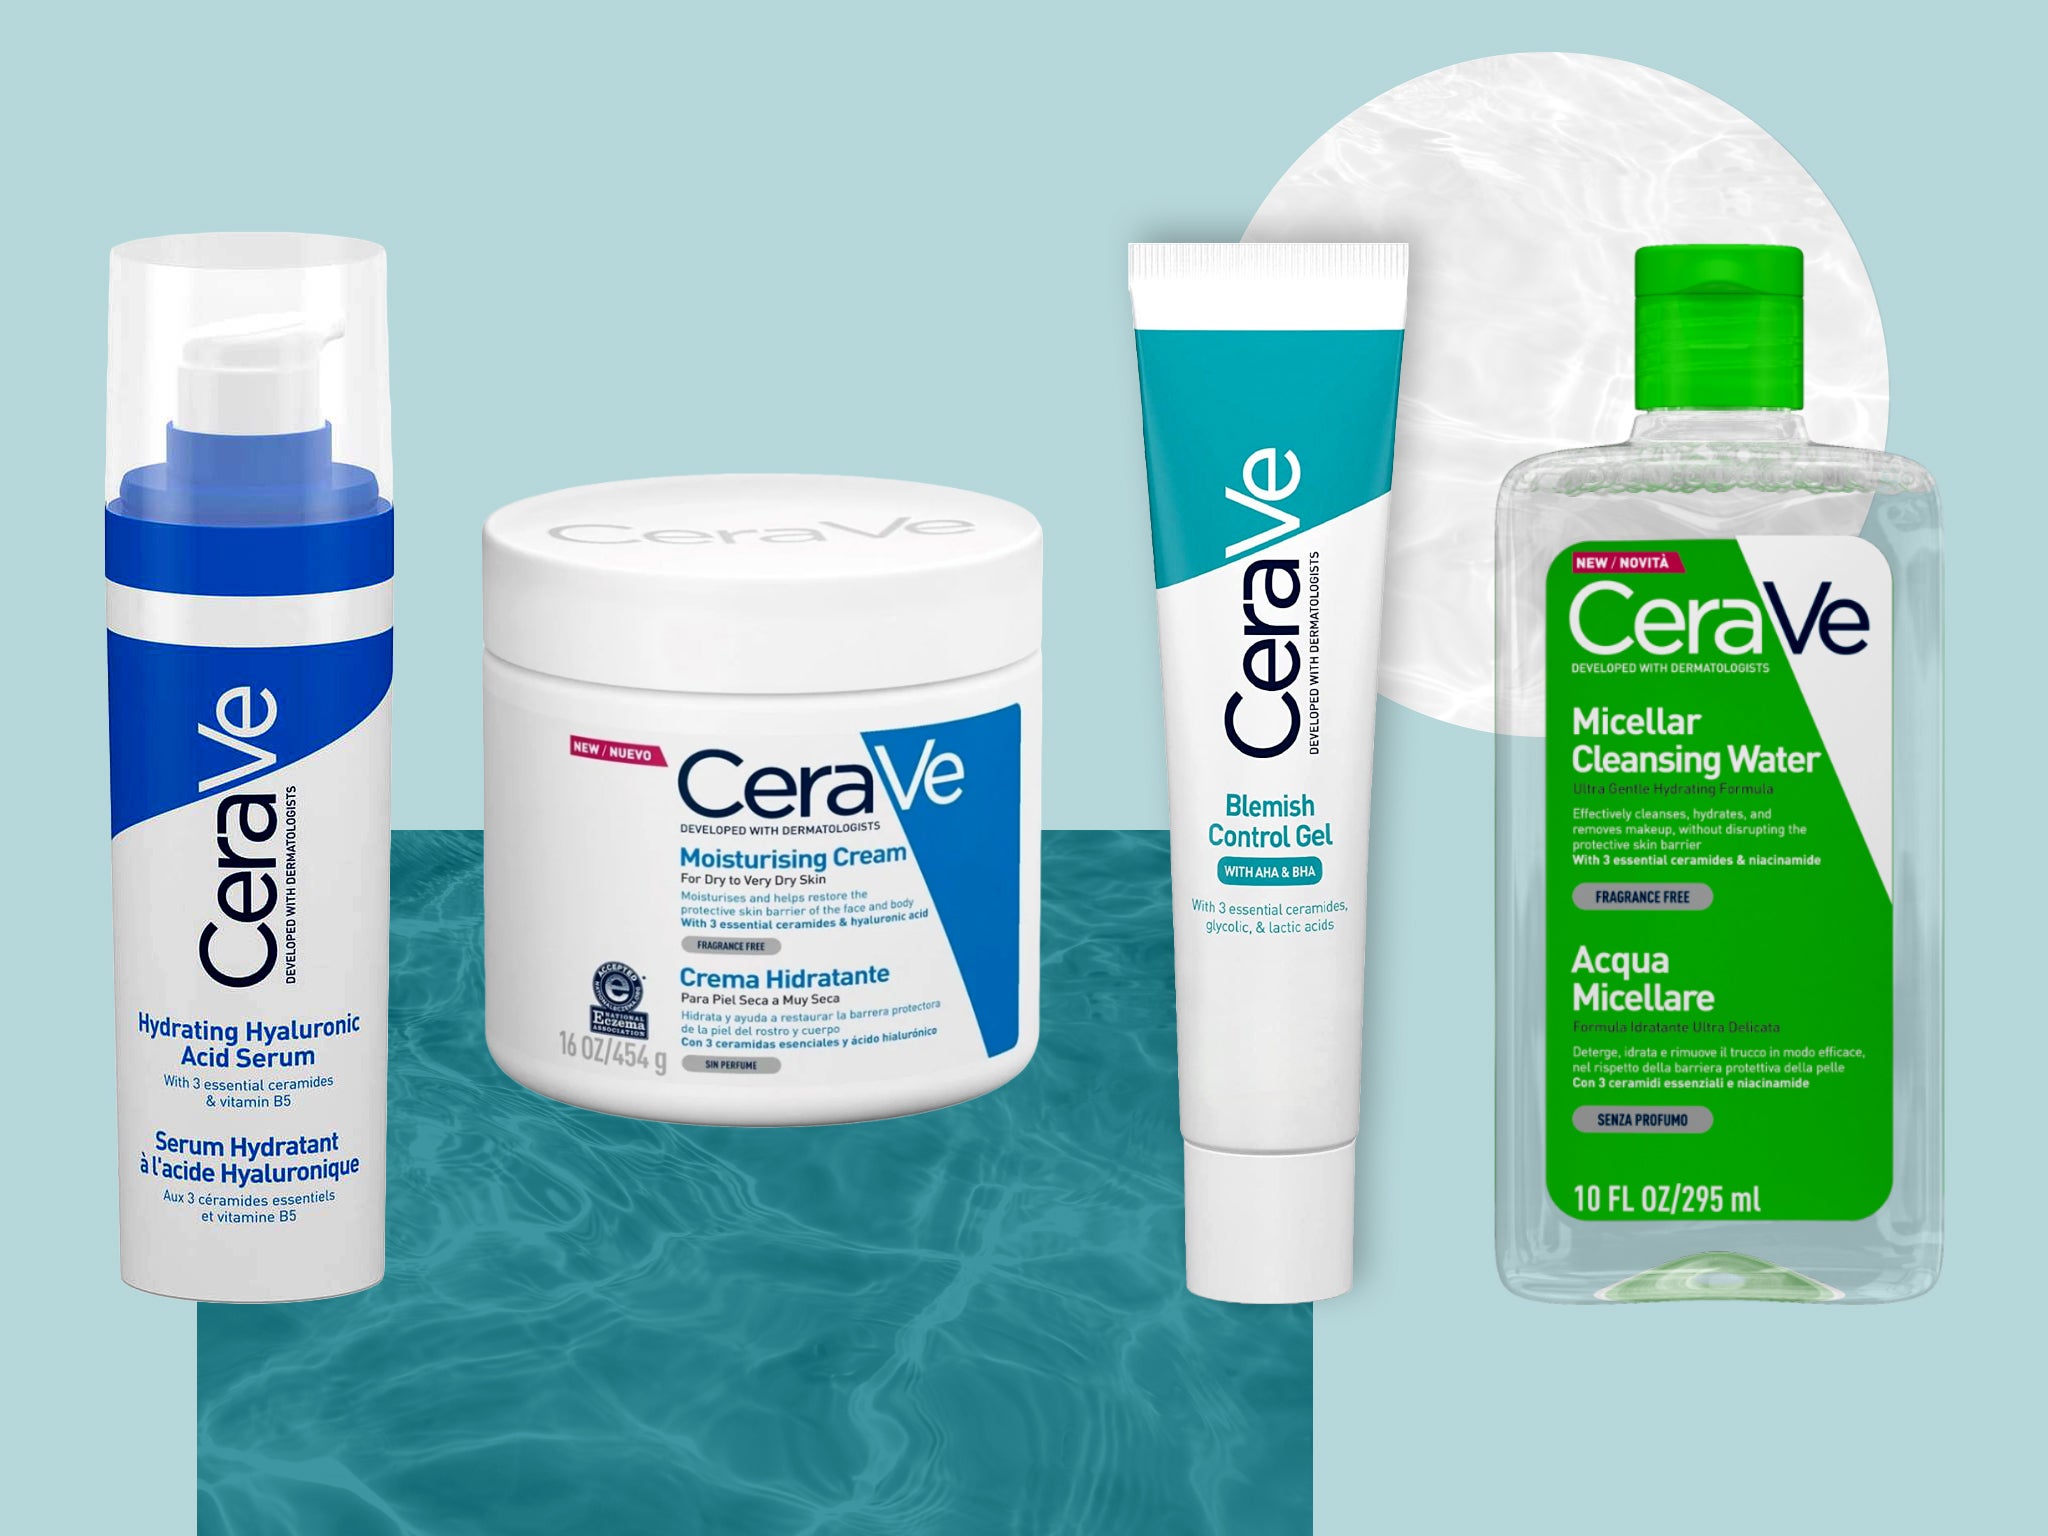 The best CeraVe skincare products to know about, according to a beauty editor